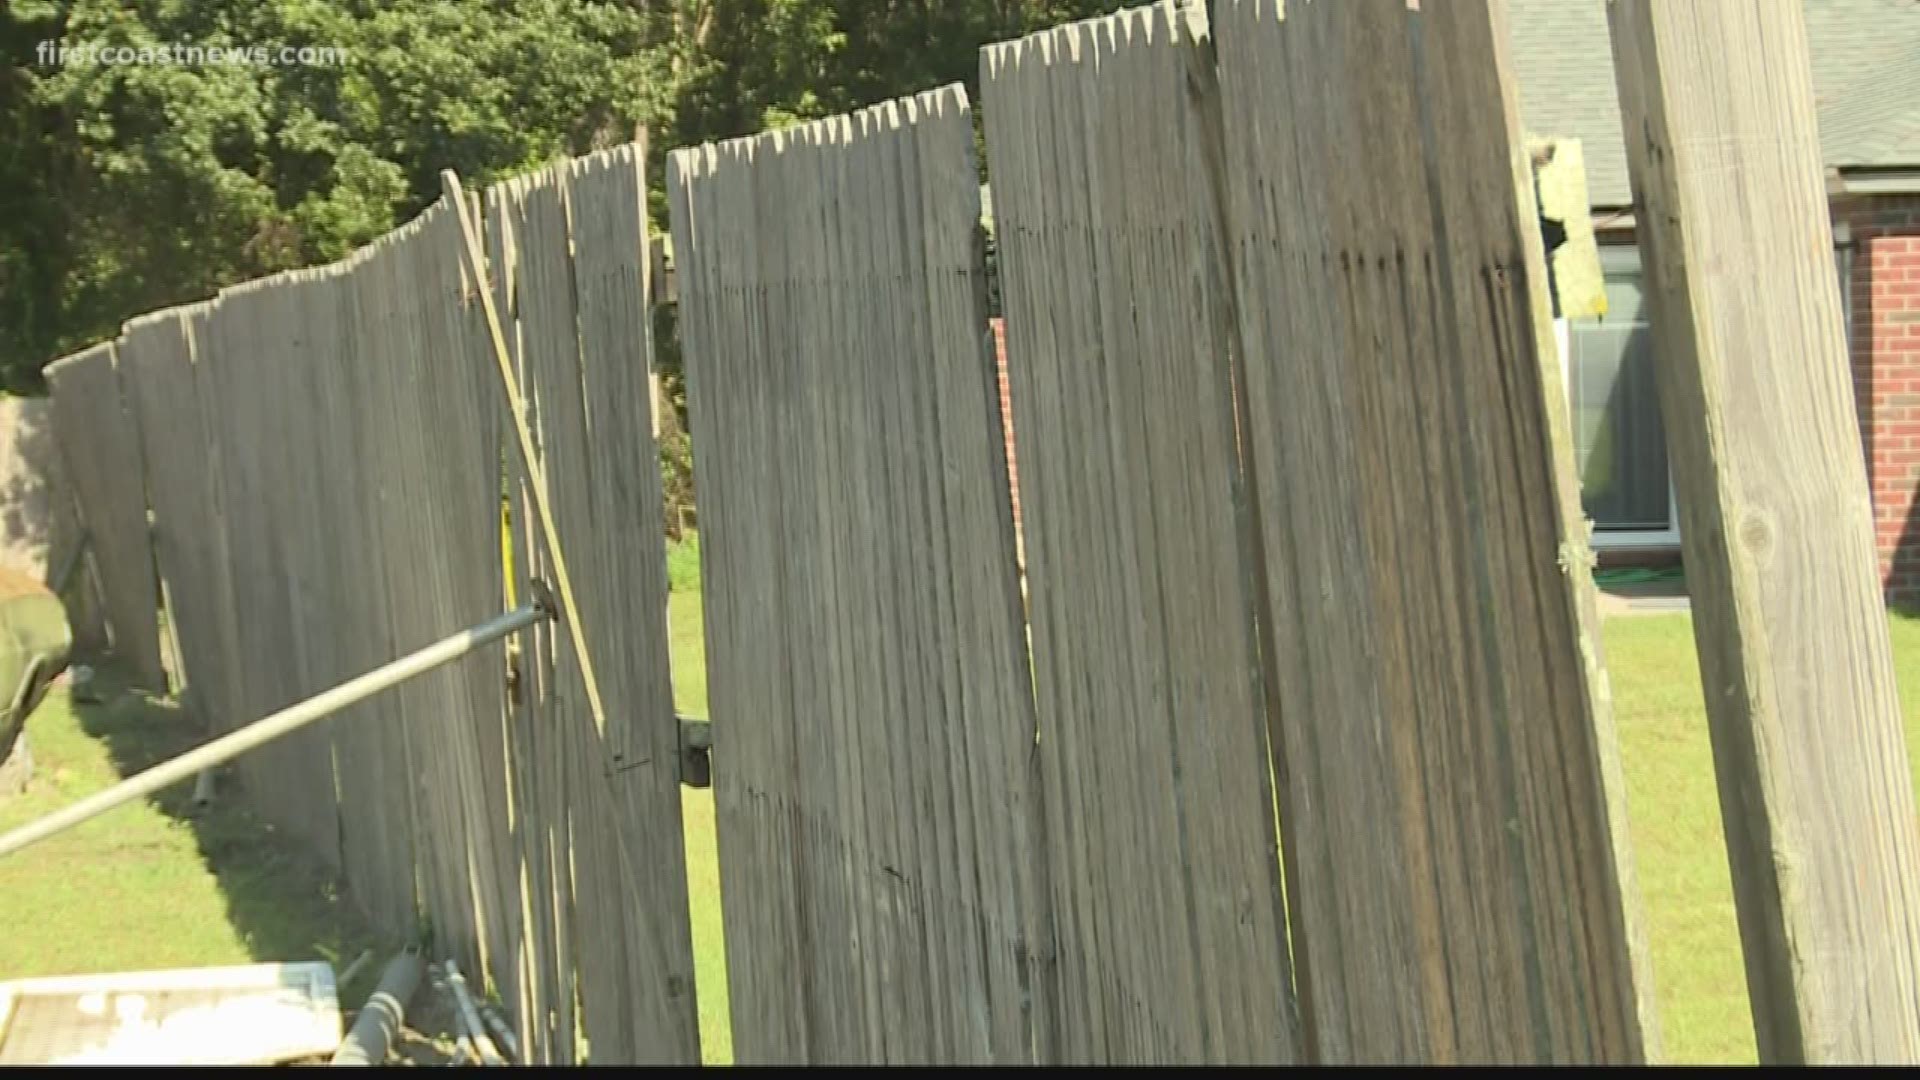 Washington says the company stopped taking his phone calls and now his Home Owners Association wants to know how long the fence will remain in its current state.